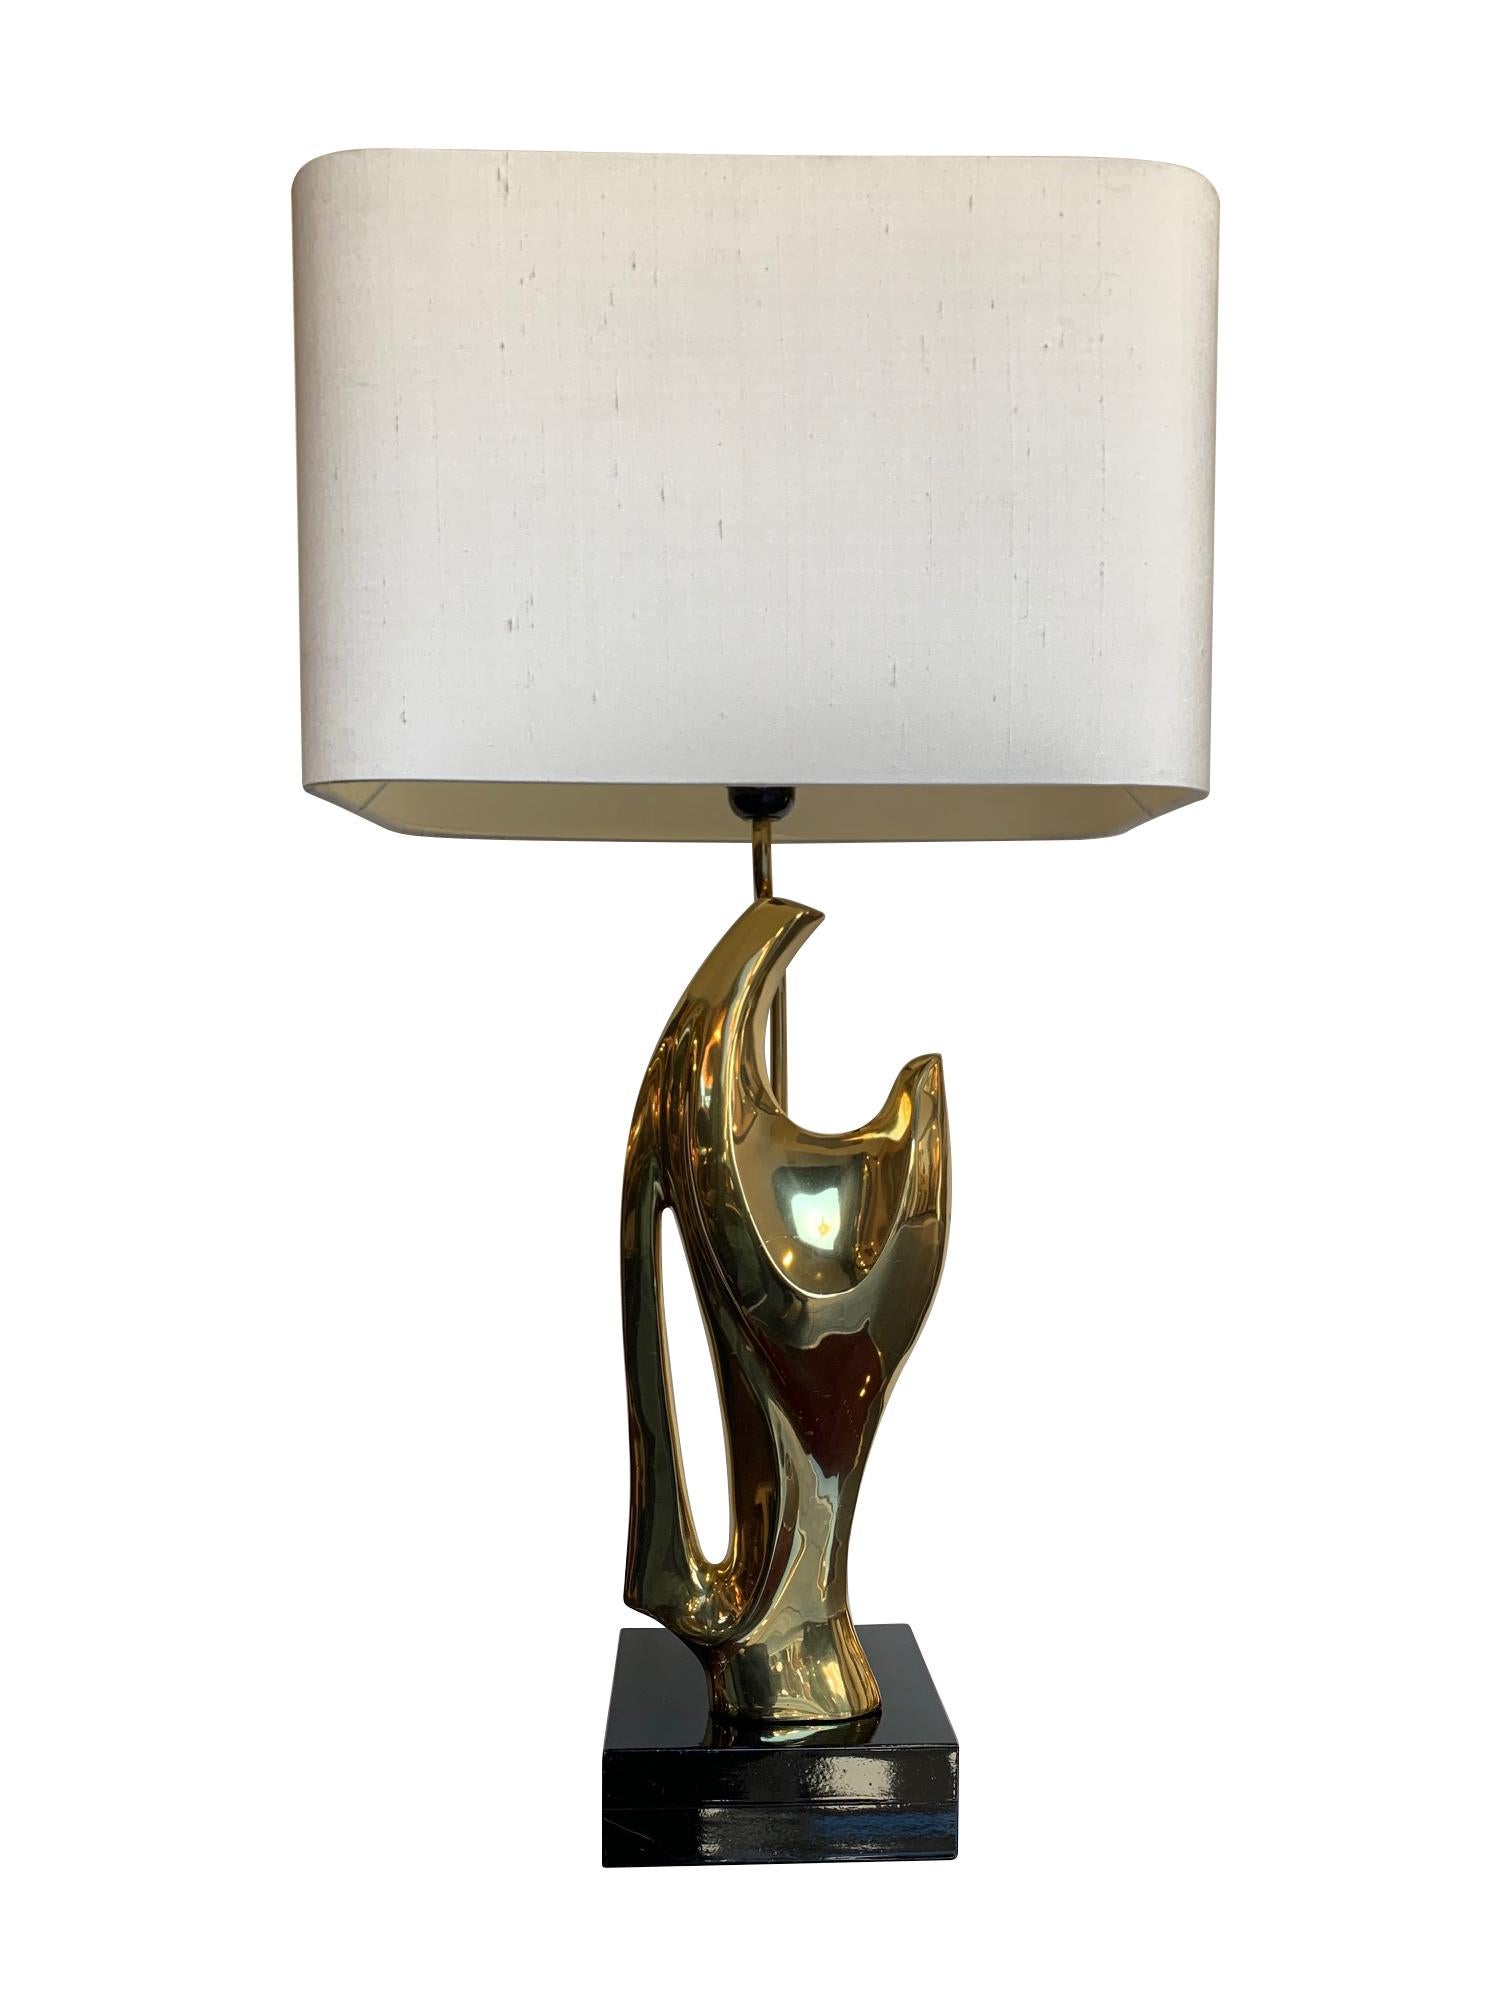 French 1970s Sculptural Lamp in the Style of Alain Chervet with Black Lacquered Base